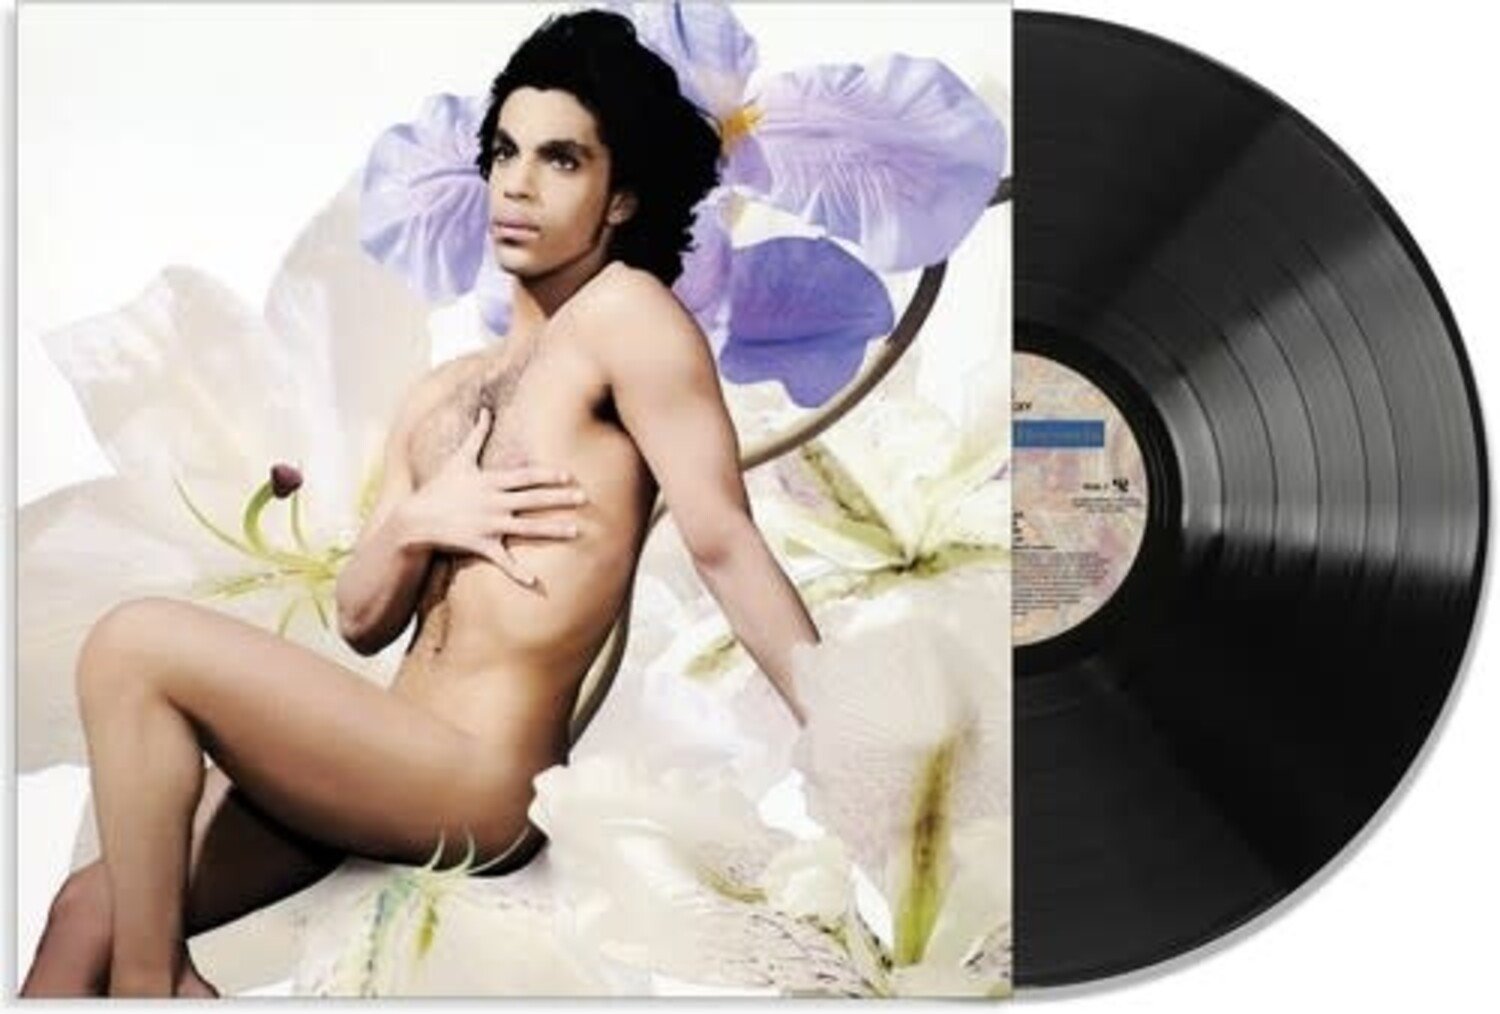 Prince - Lovesexy LP - Wax Trax Records